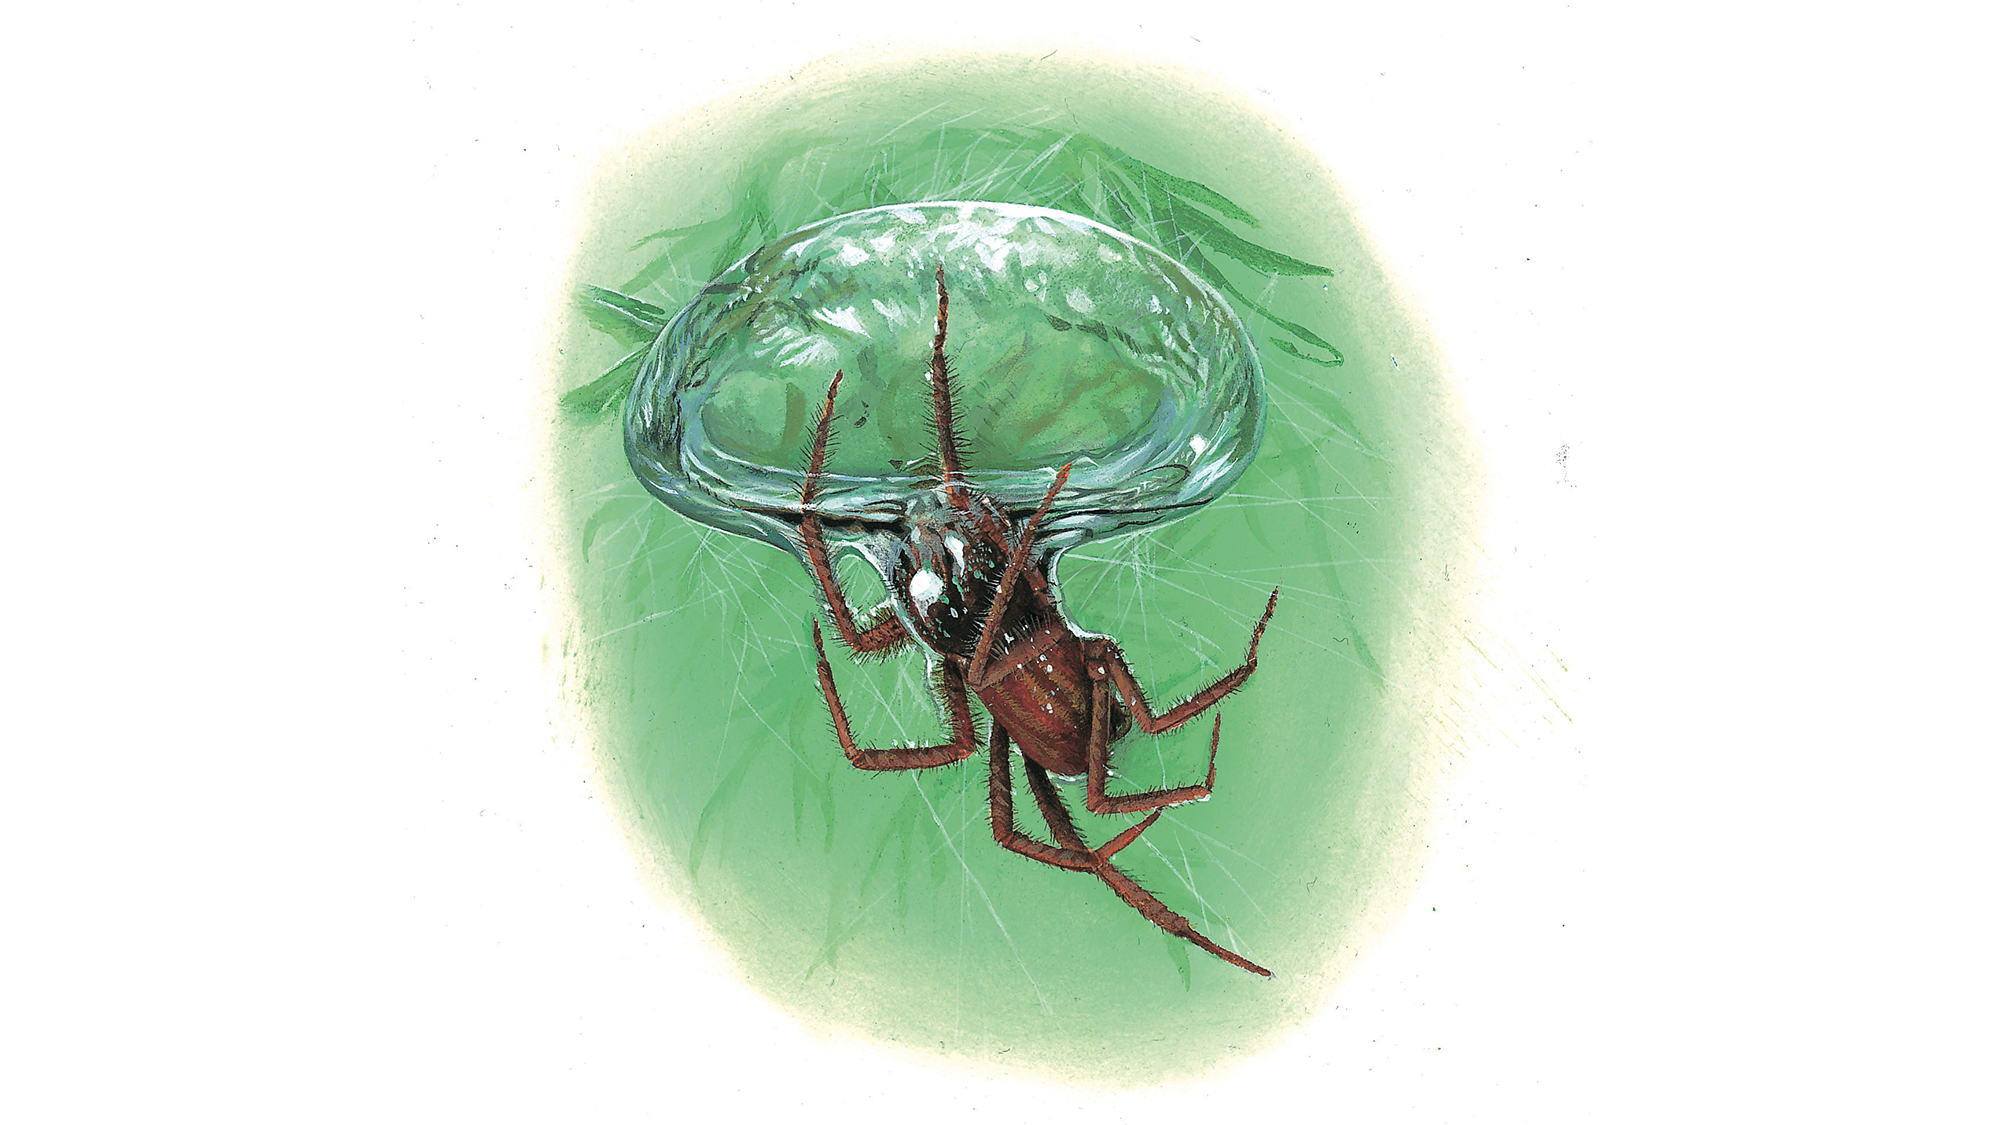 Of all the aquatic spiders, the diving bell spider is the only one known to survive almost entirely underwater, using bubbles of air it brings down from the surface.